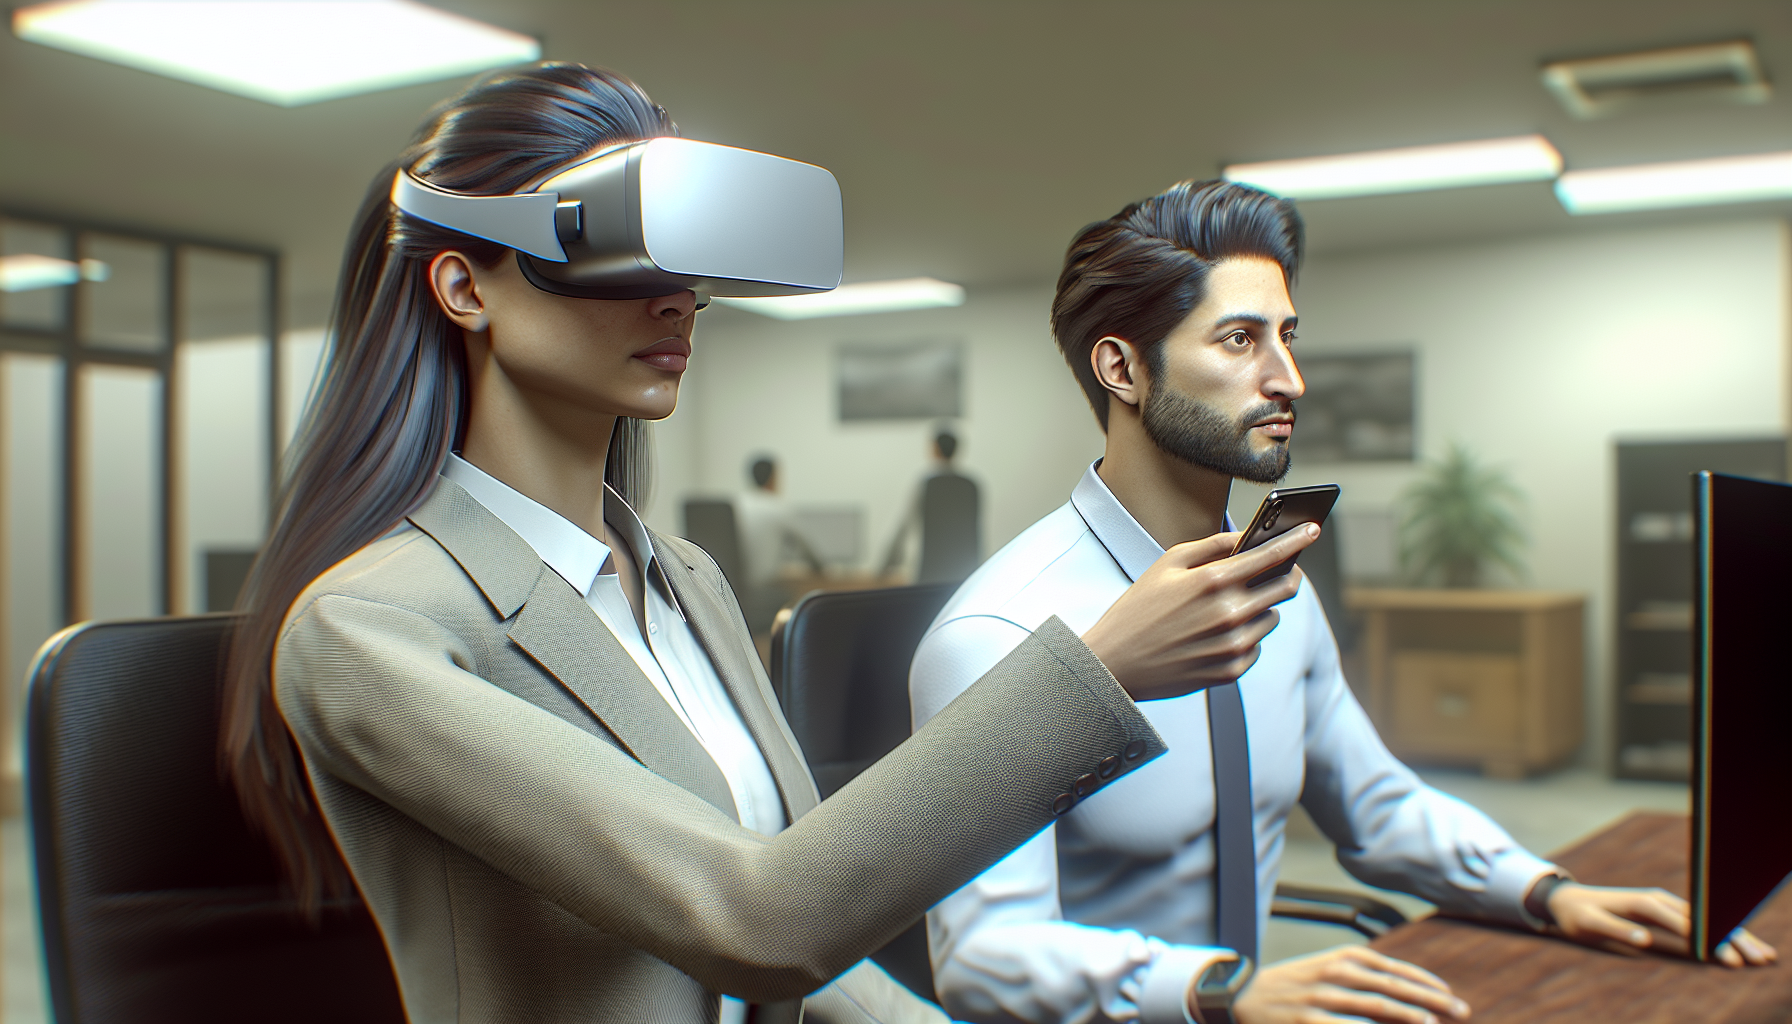 Why VR Team Building is Gaining Popularity